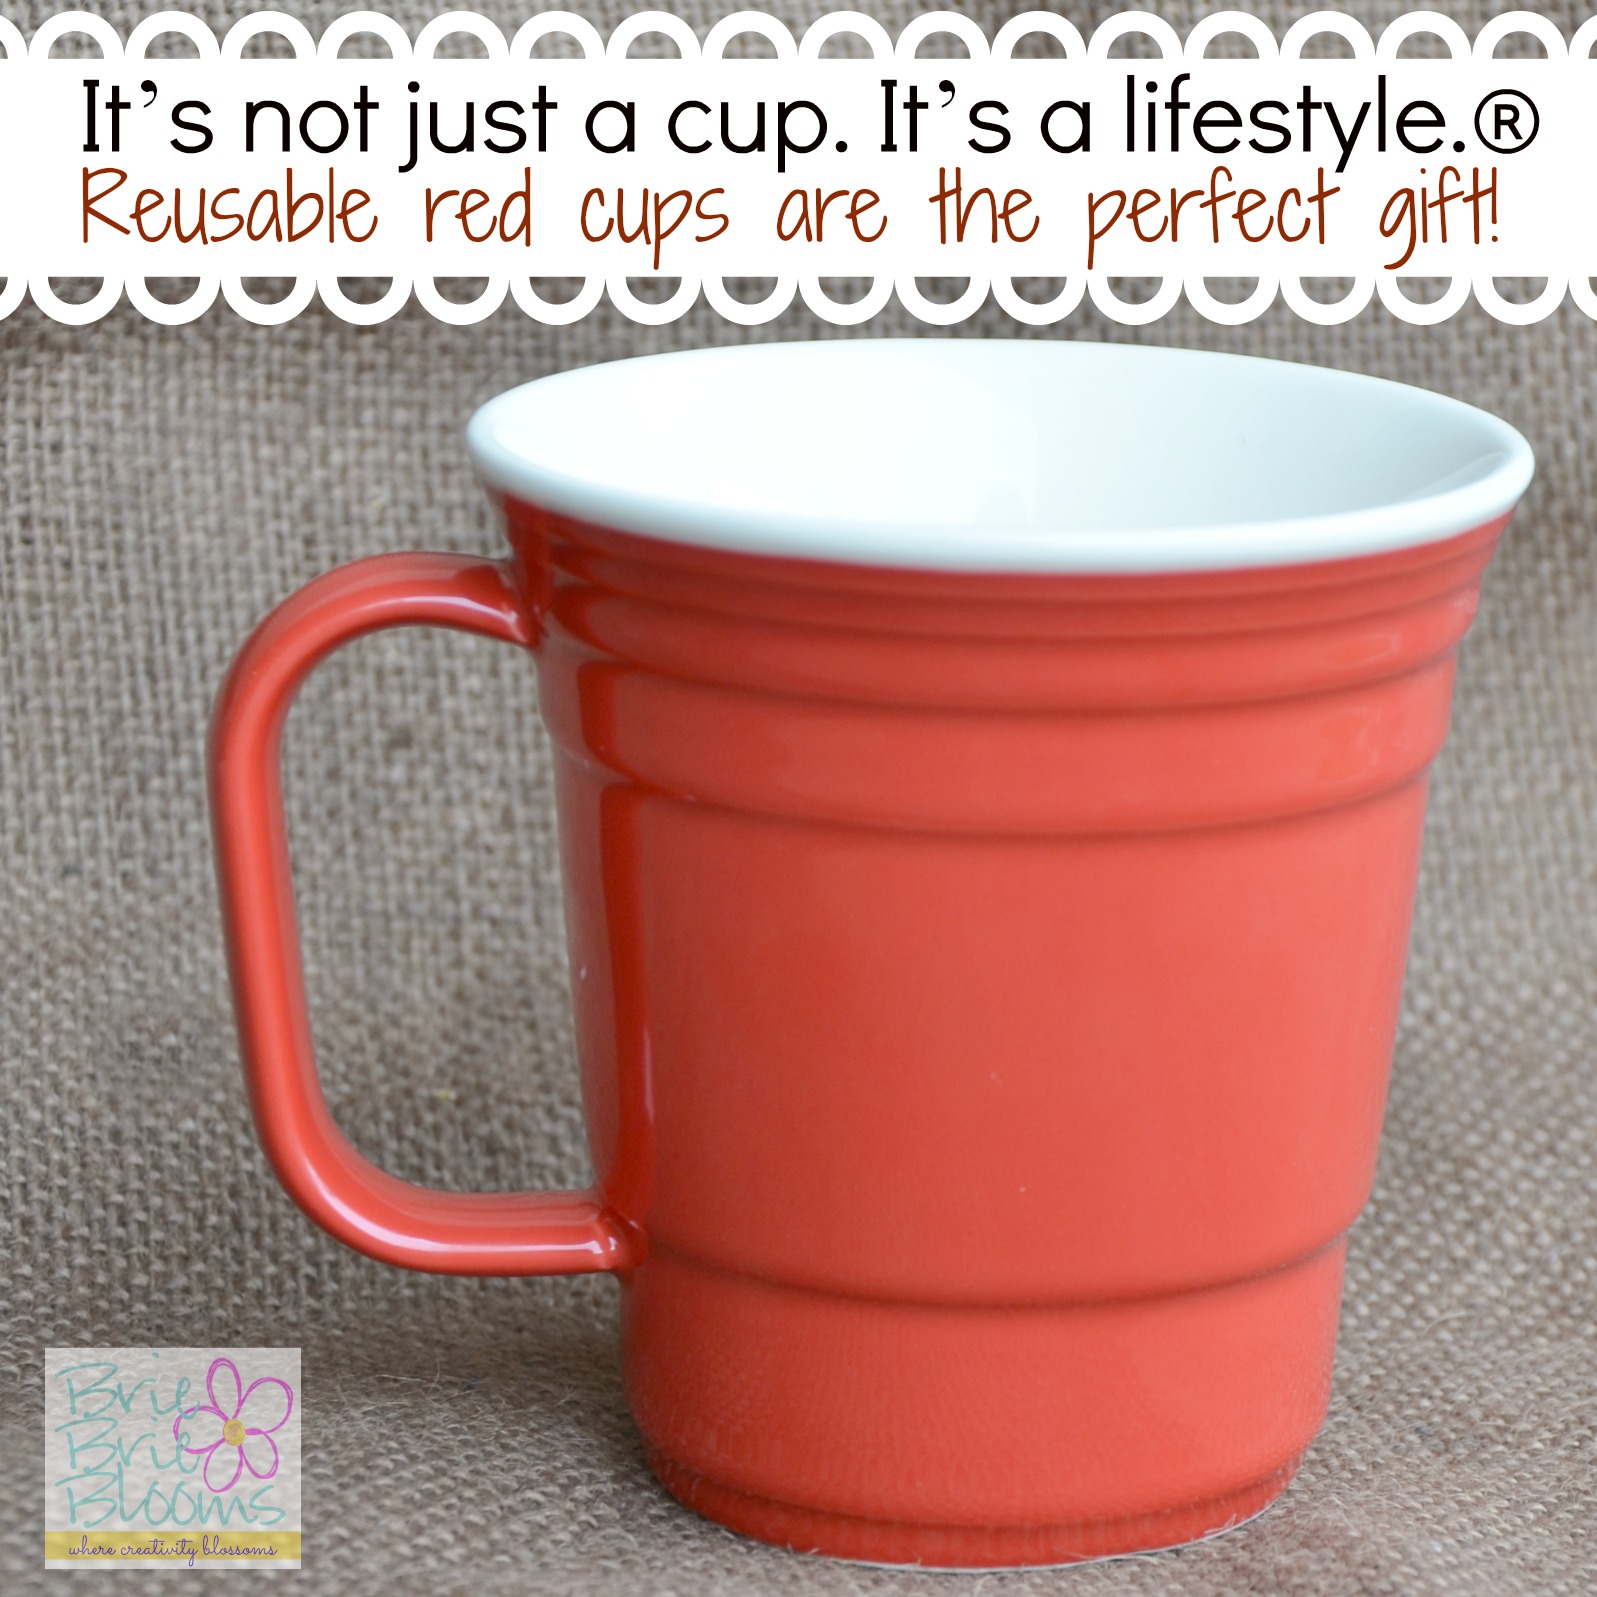 Red Cup Living reusable red cups make the perfect gift